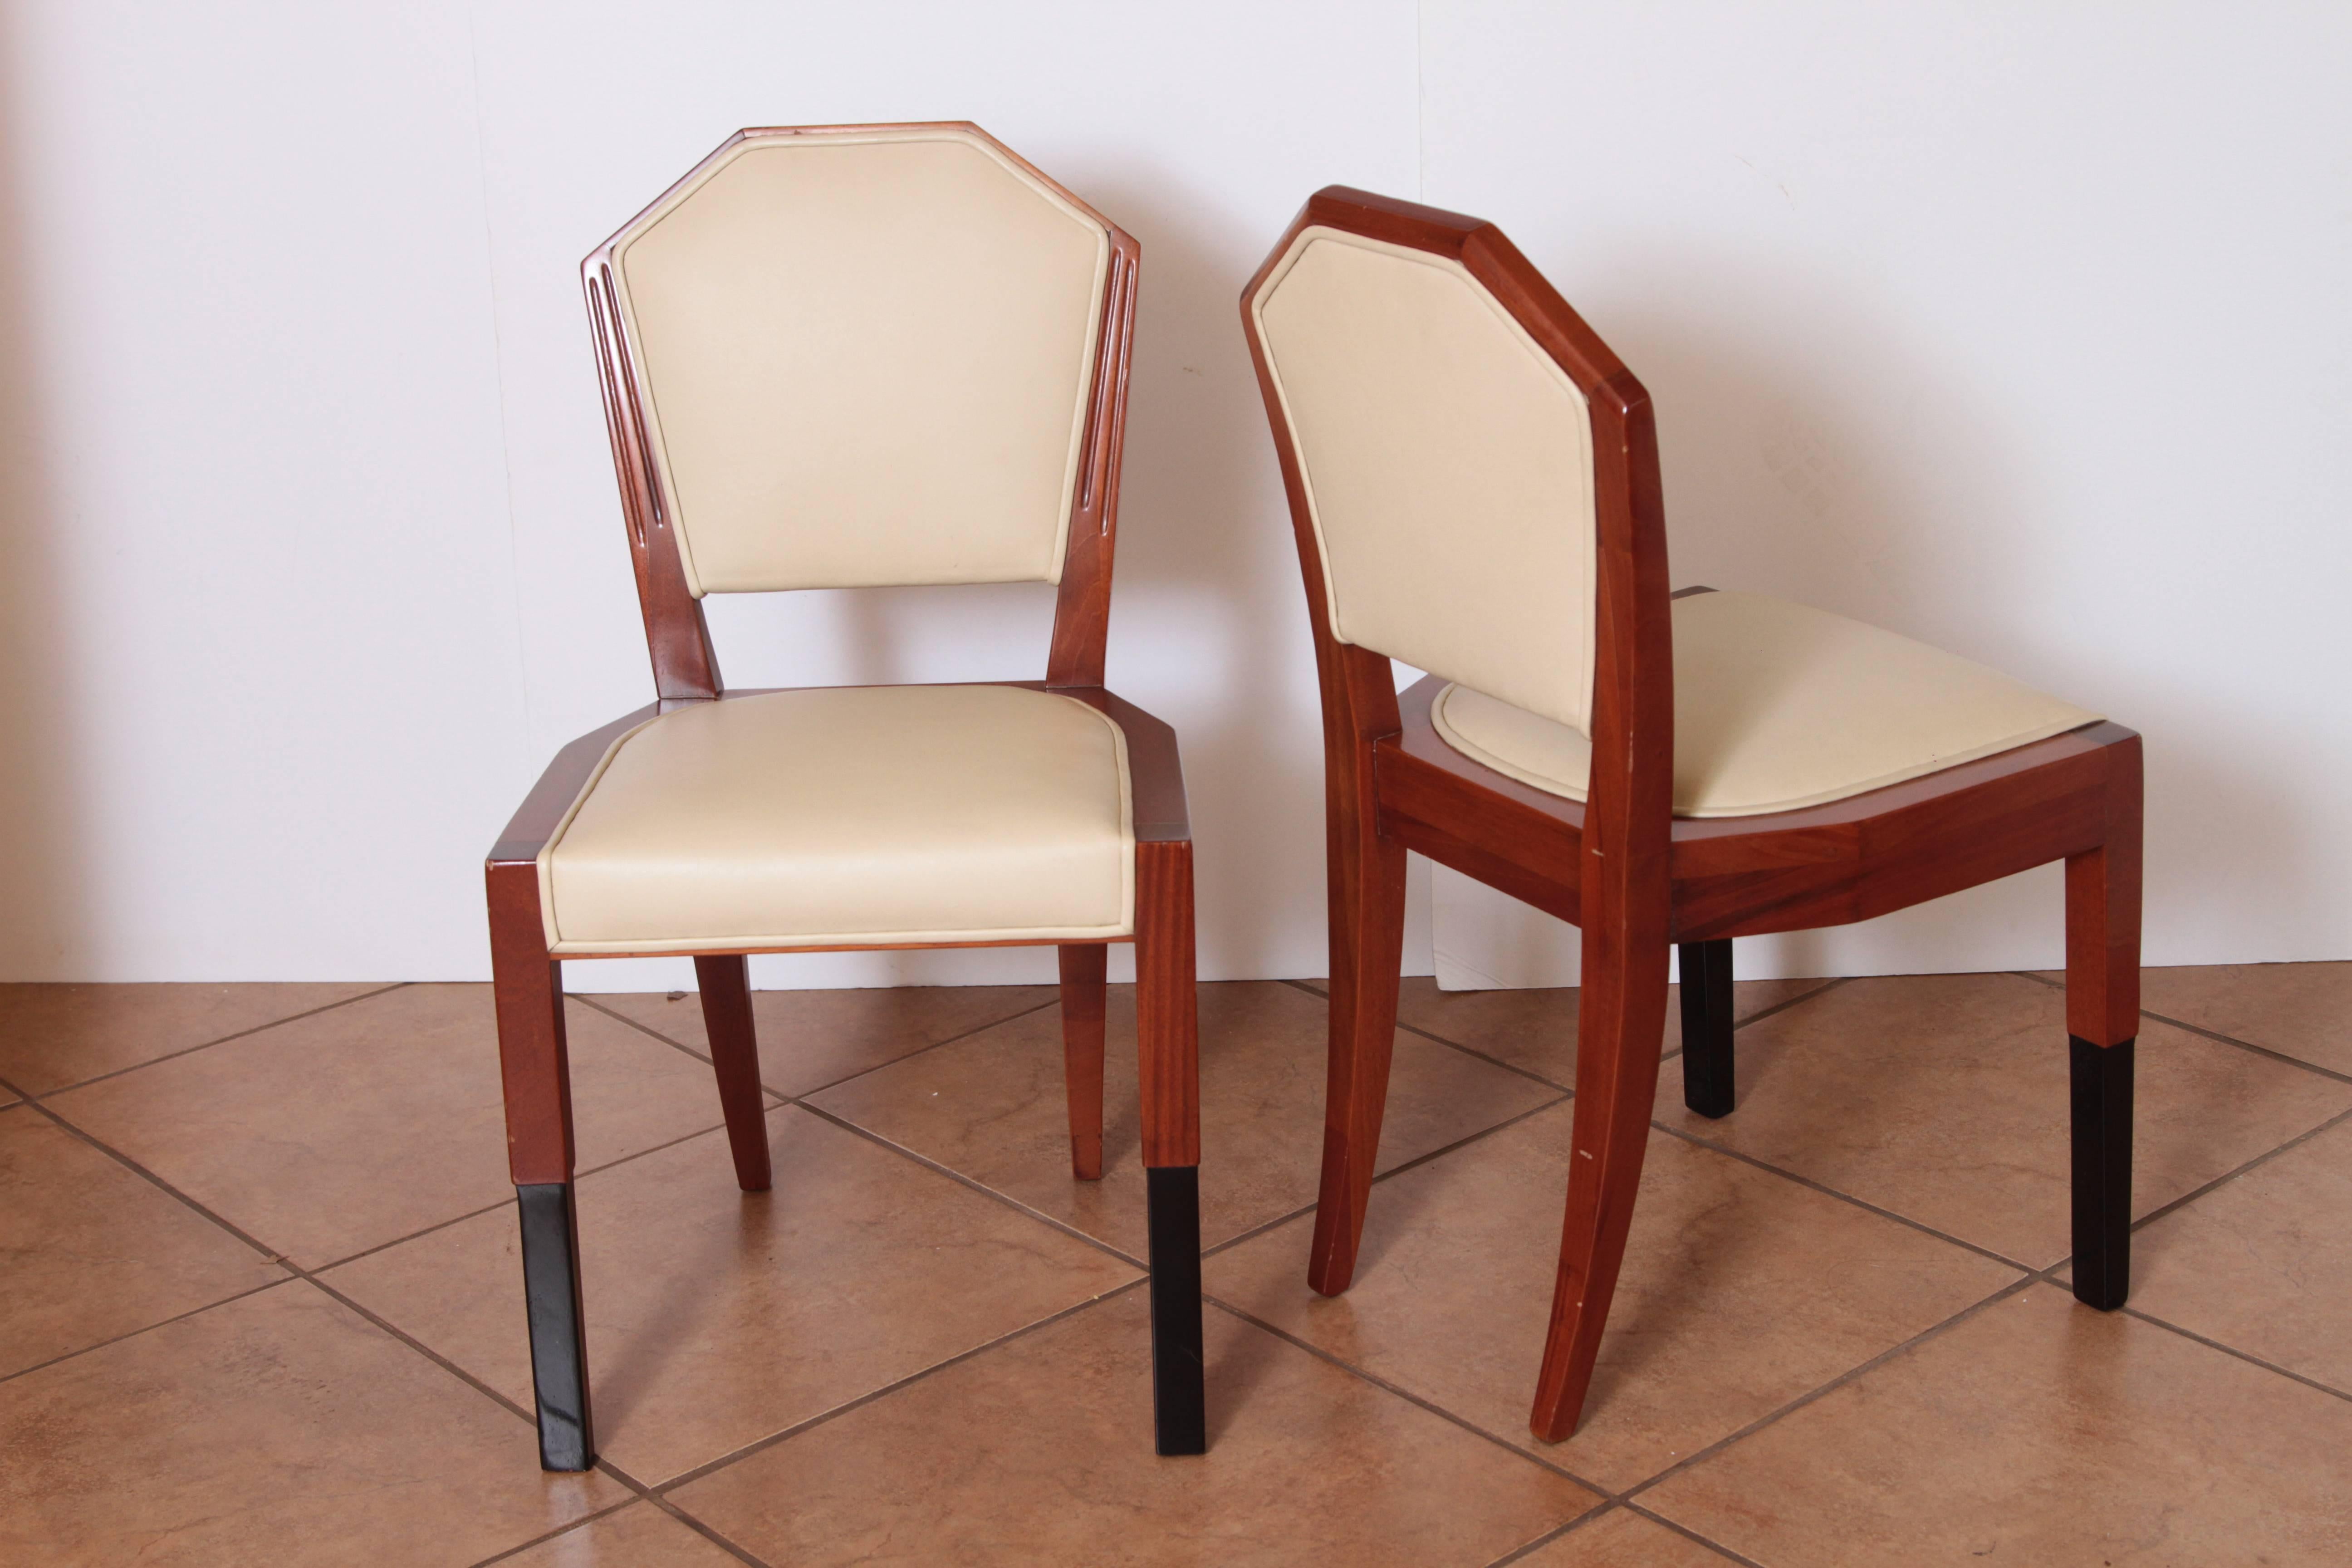 Mid-20th Century Art Deco Dynamique Creations Johnson Furniture Co. Set of Four Side Chairs For Sale